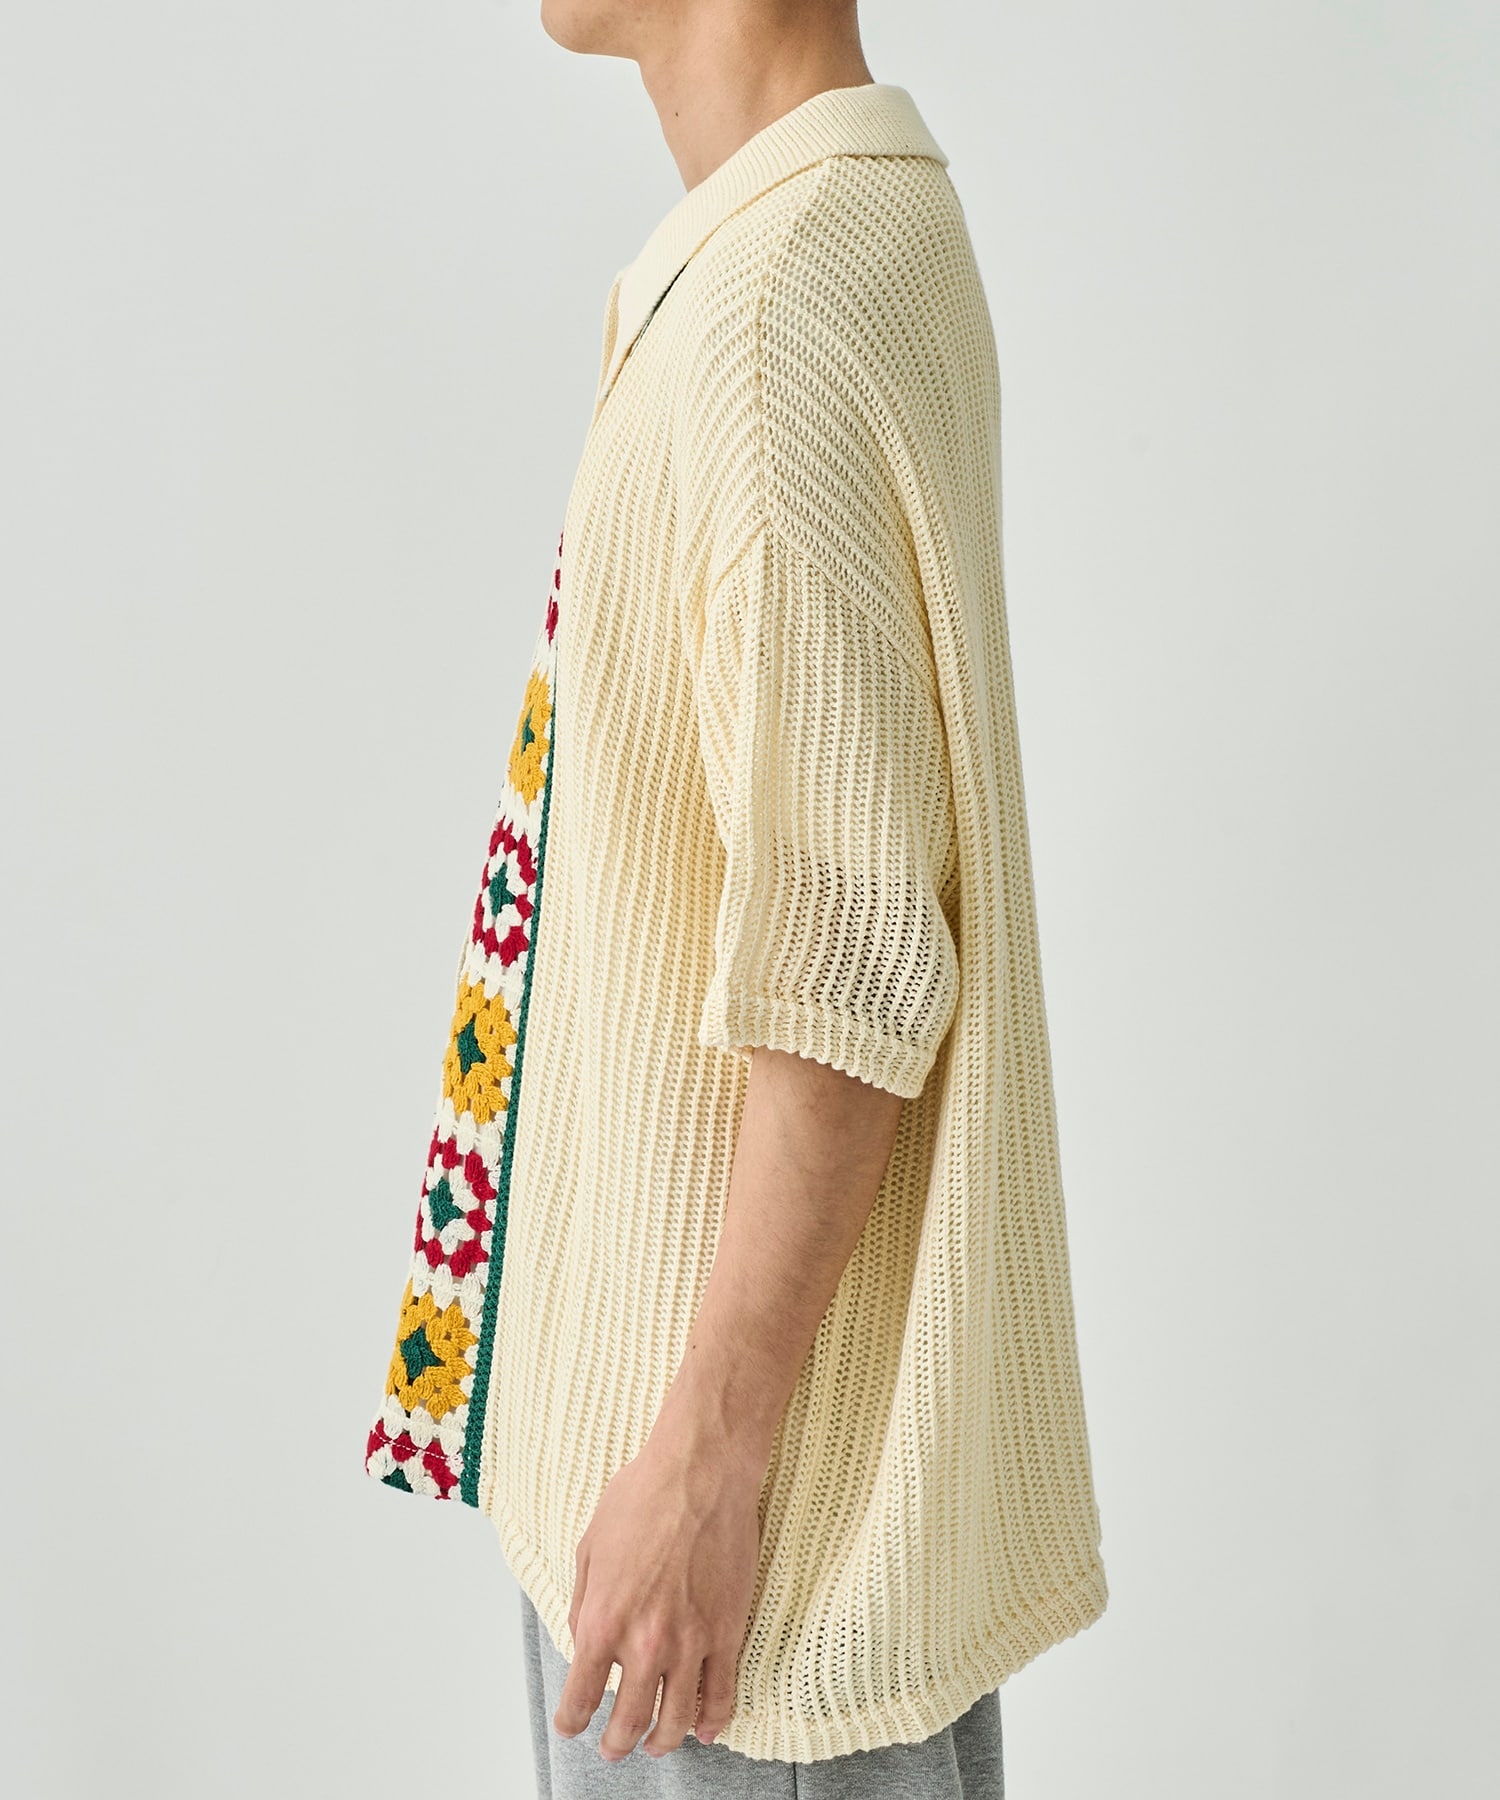 CROCHET LINE KNIT SHIRTS DISCOVERED